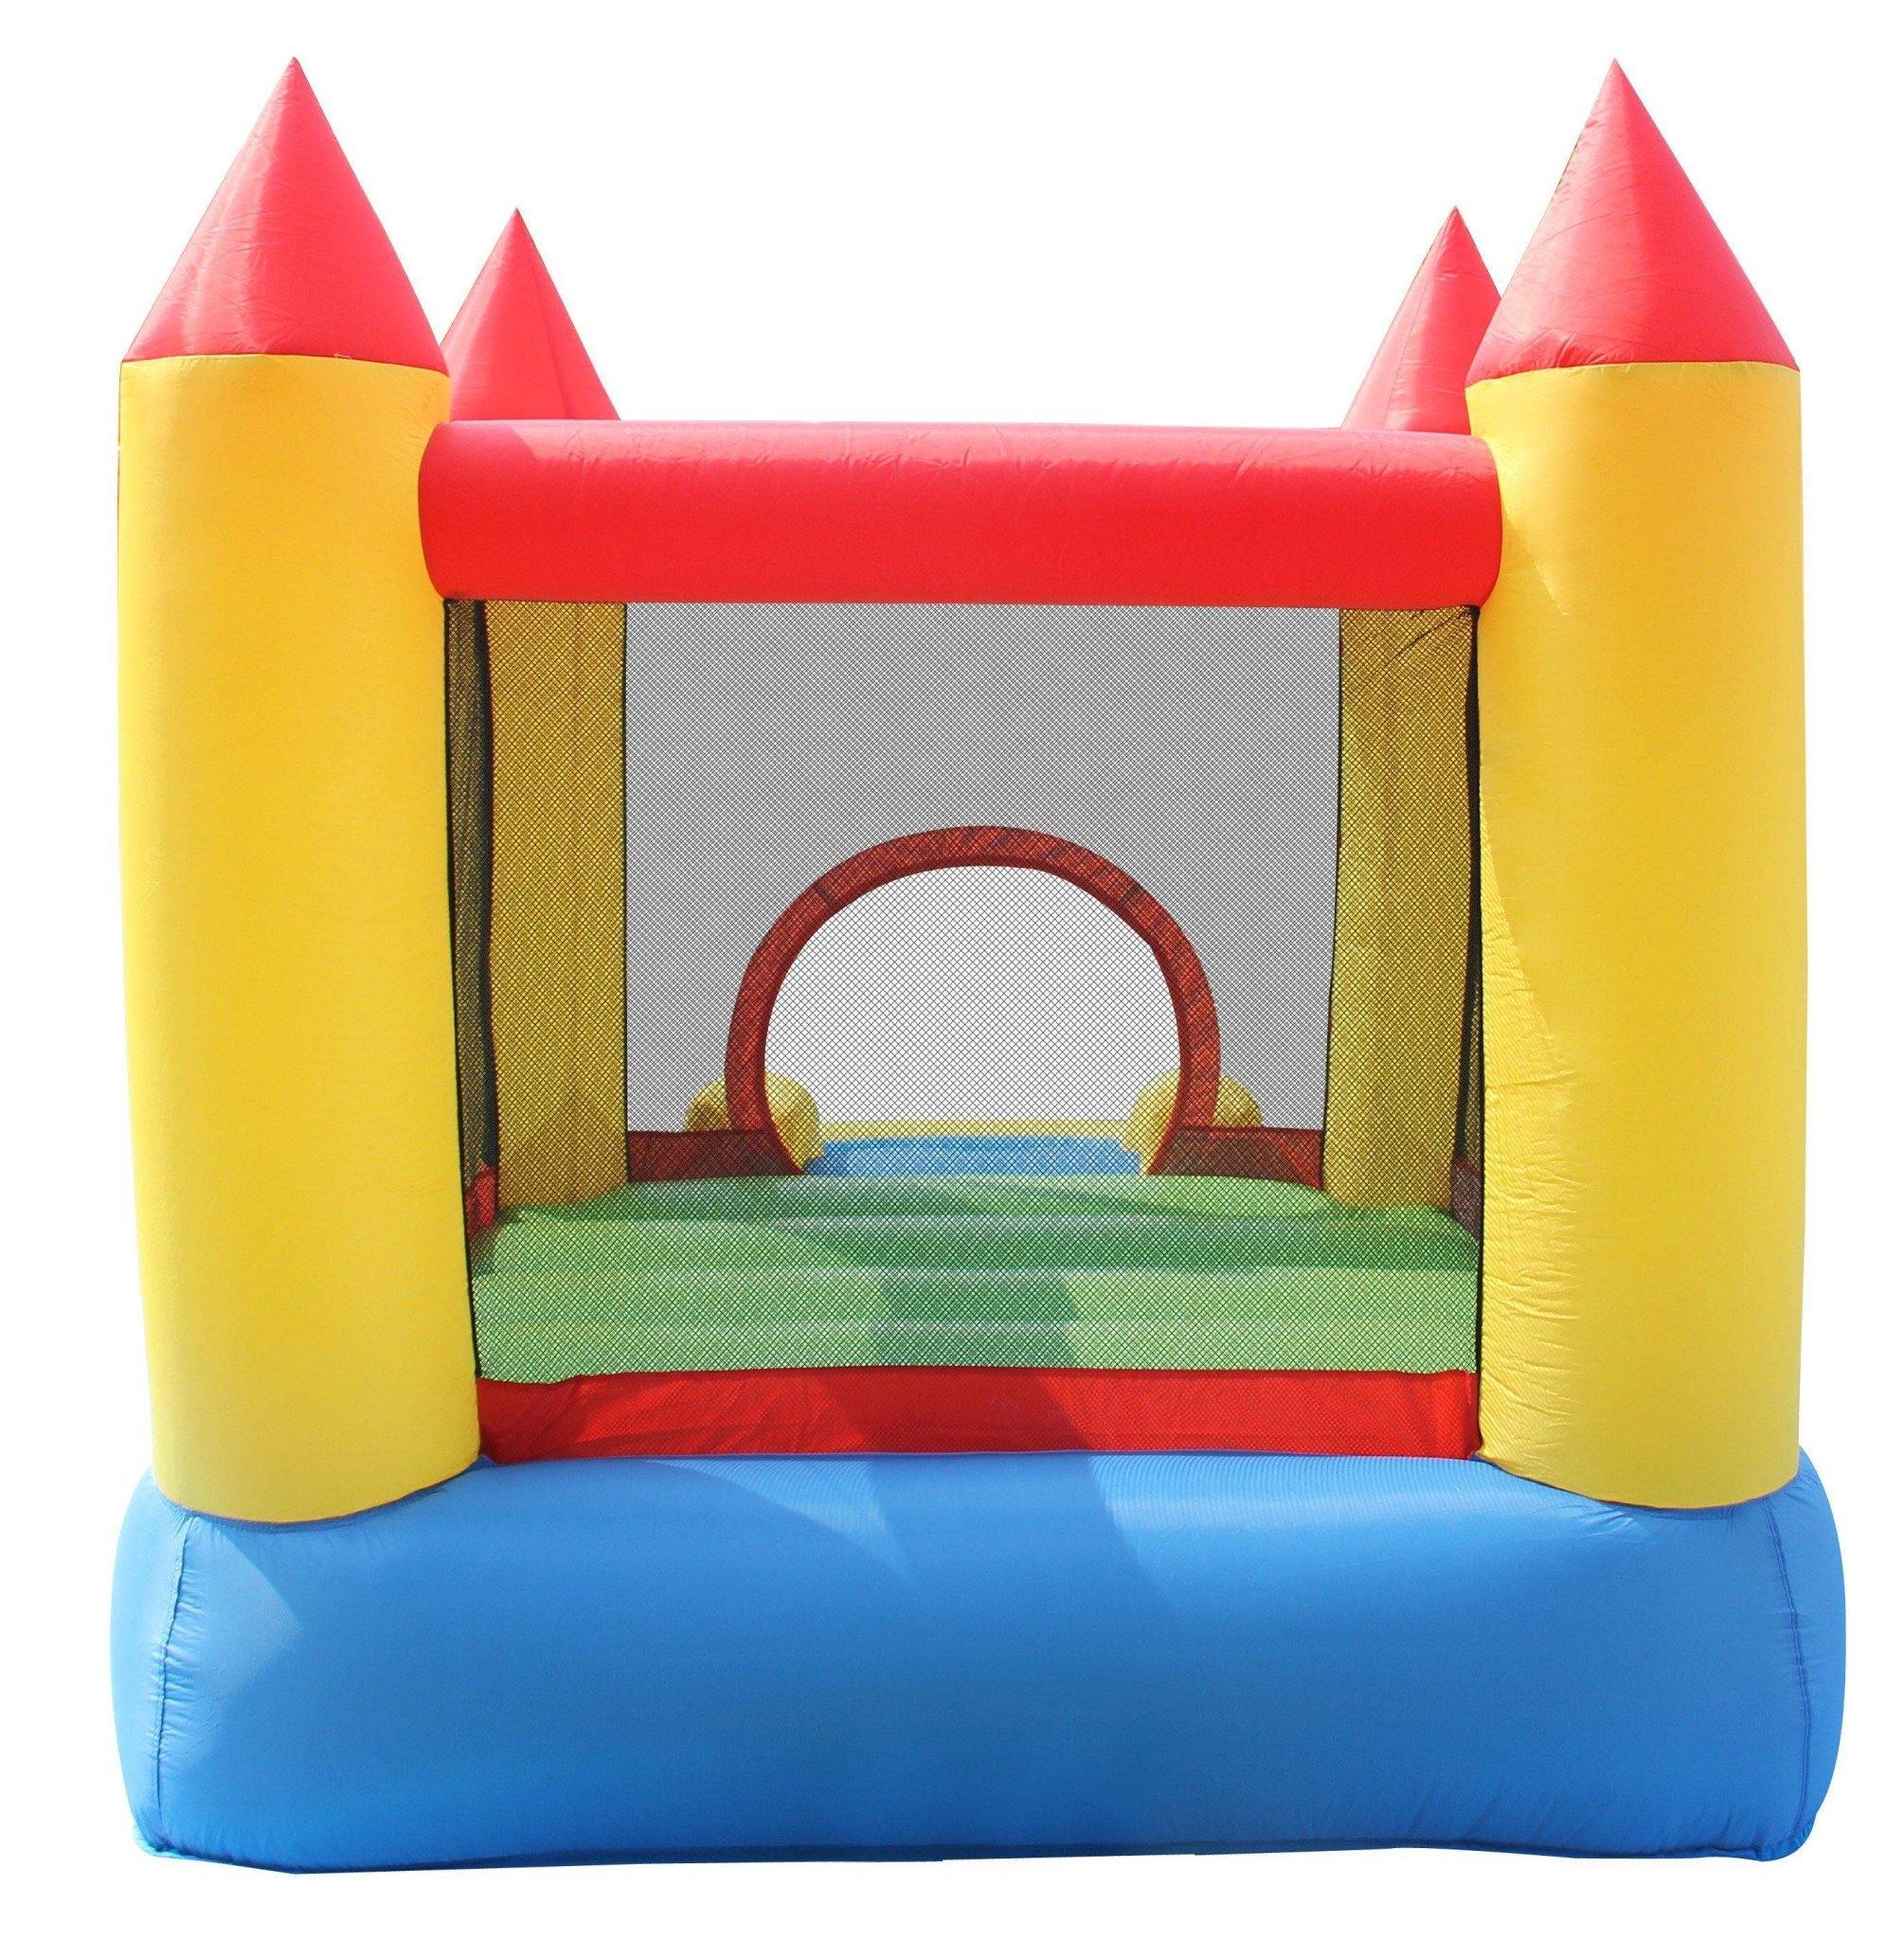 Bouncy Castle with Pool Slide - Dti Direct USA